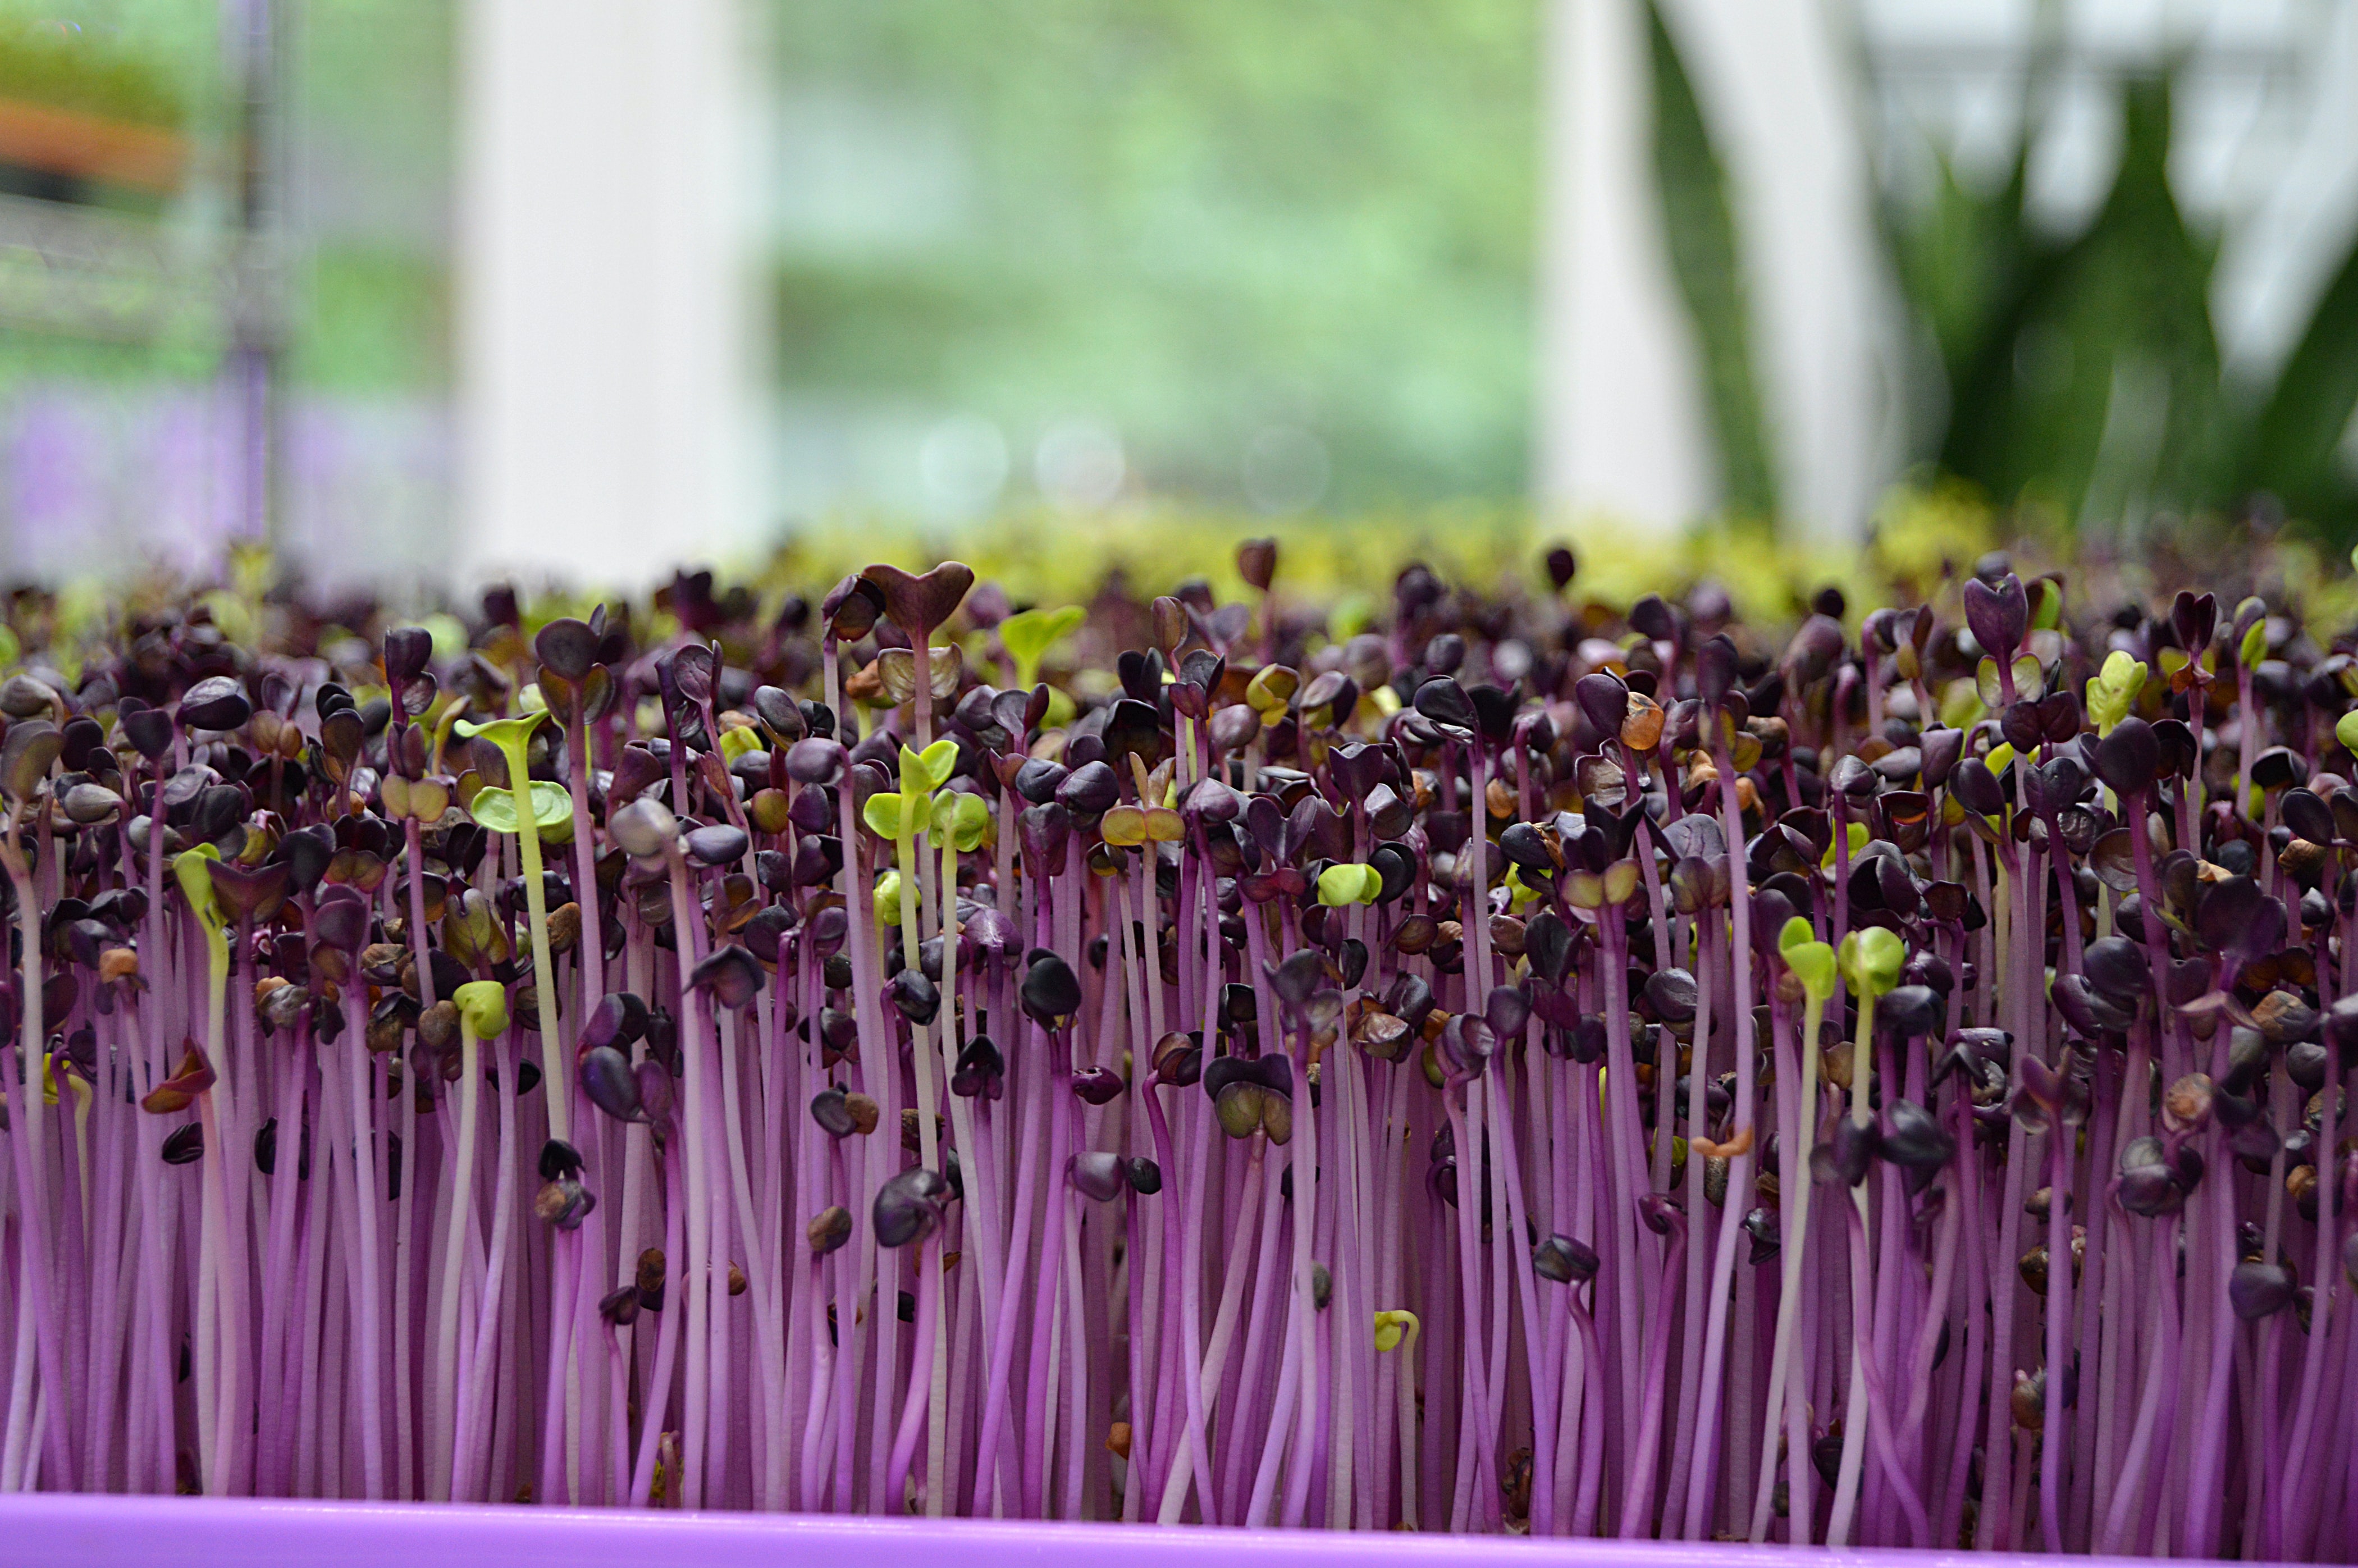 close up view of tray of microgreens with purple tinted stems